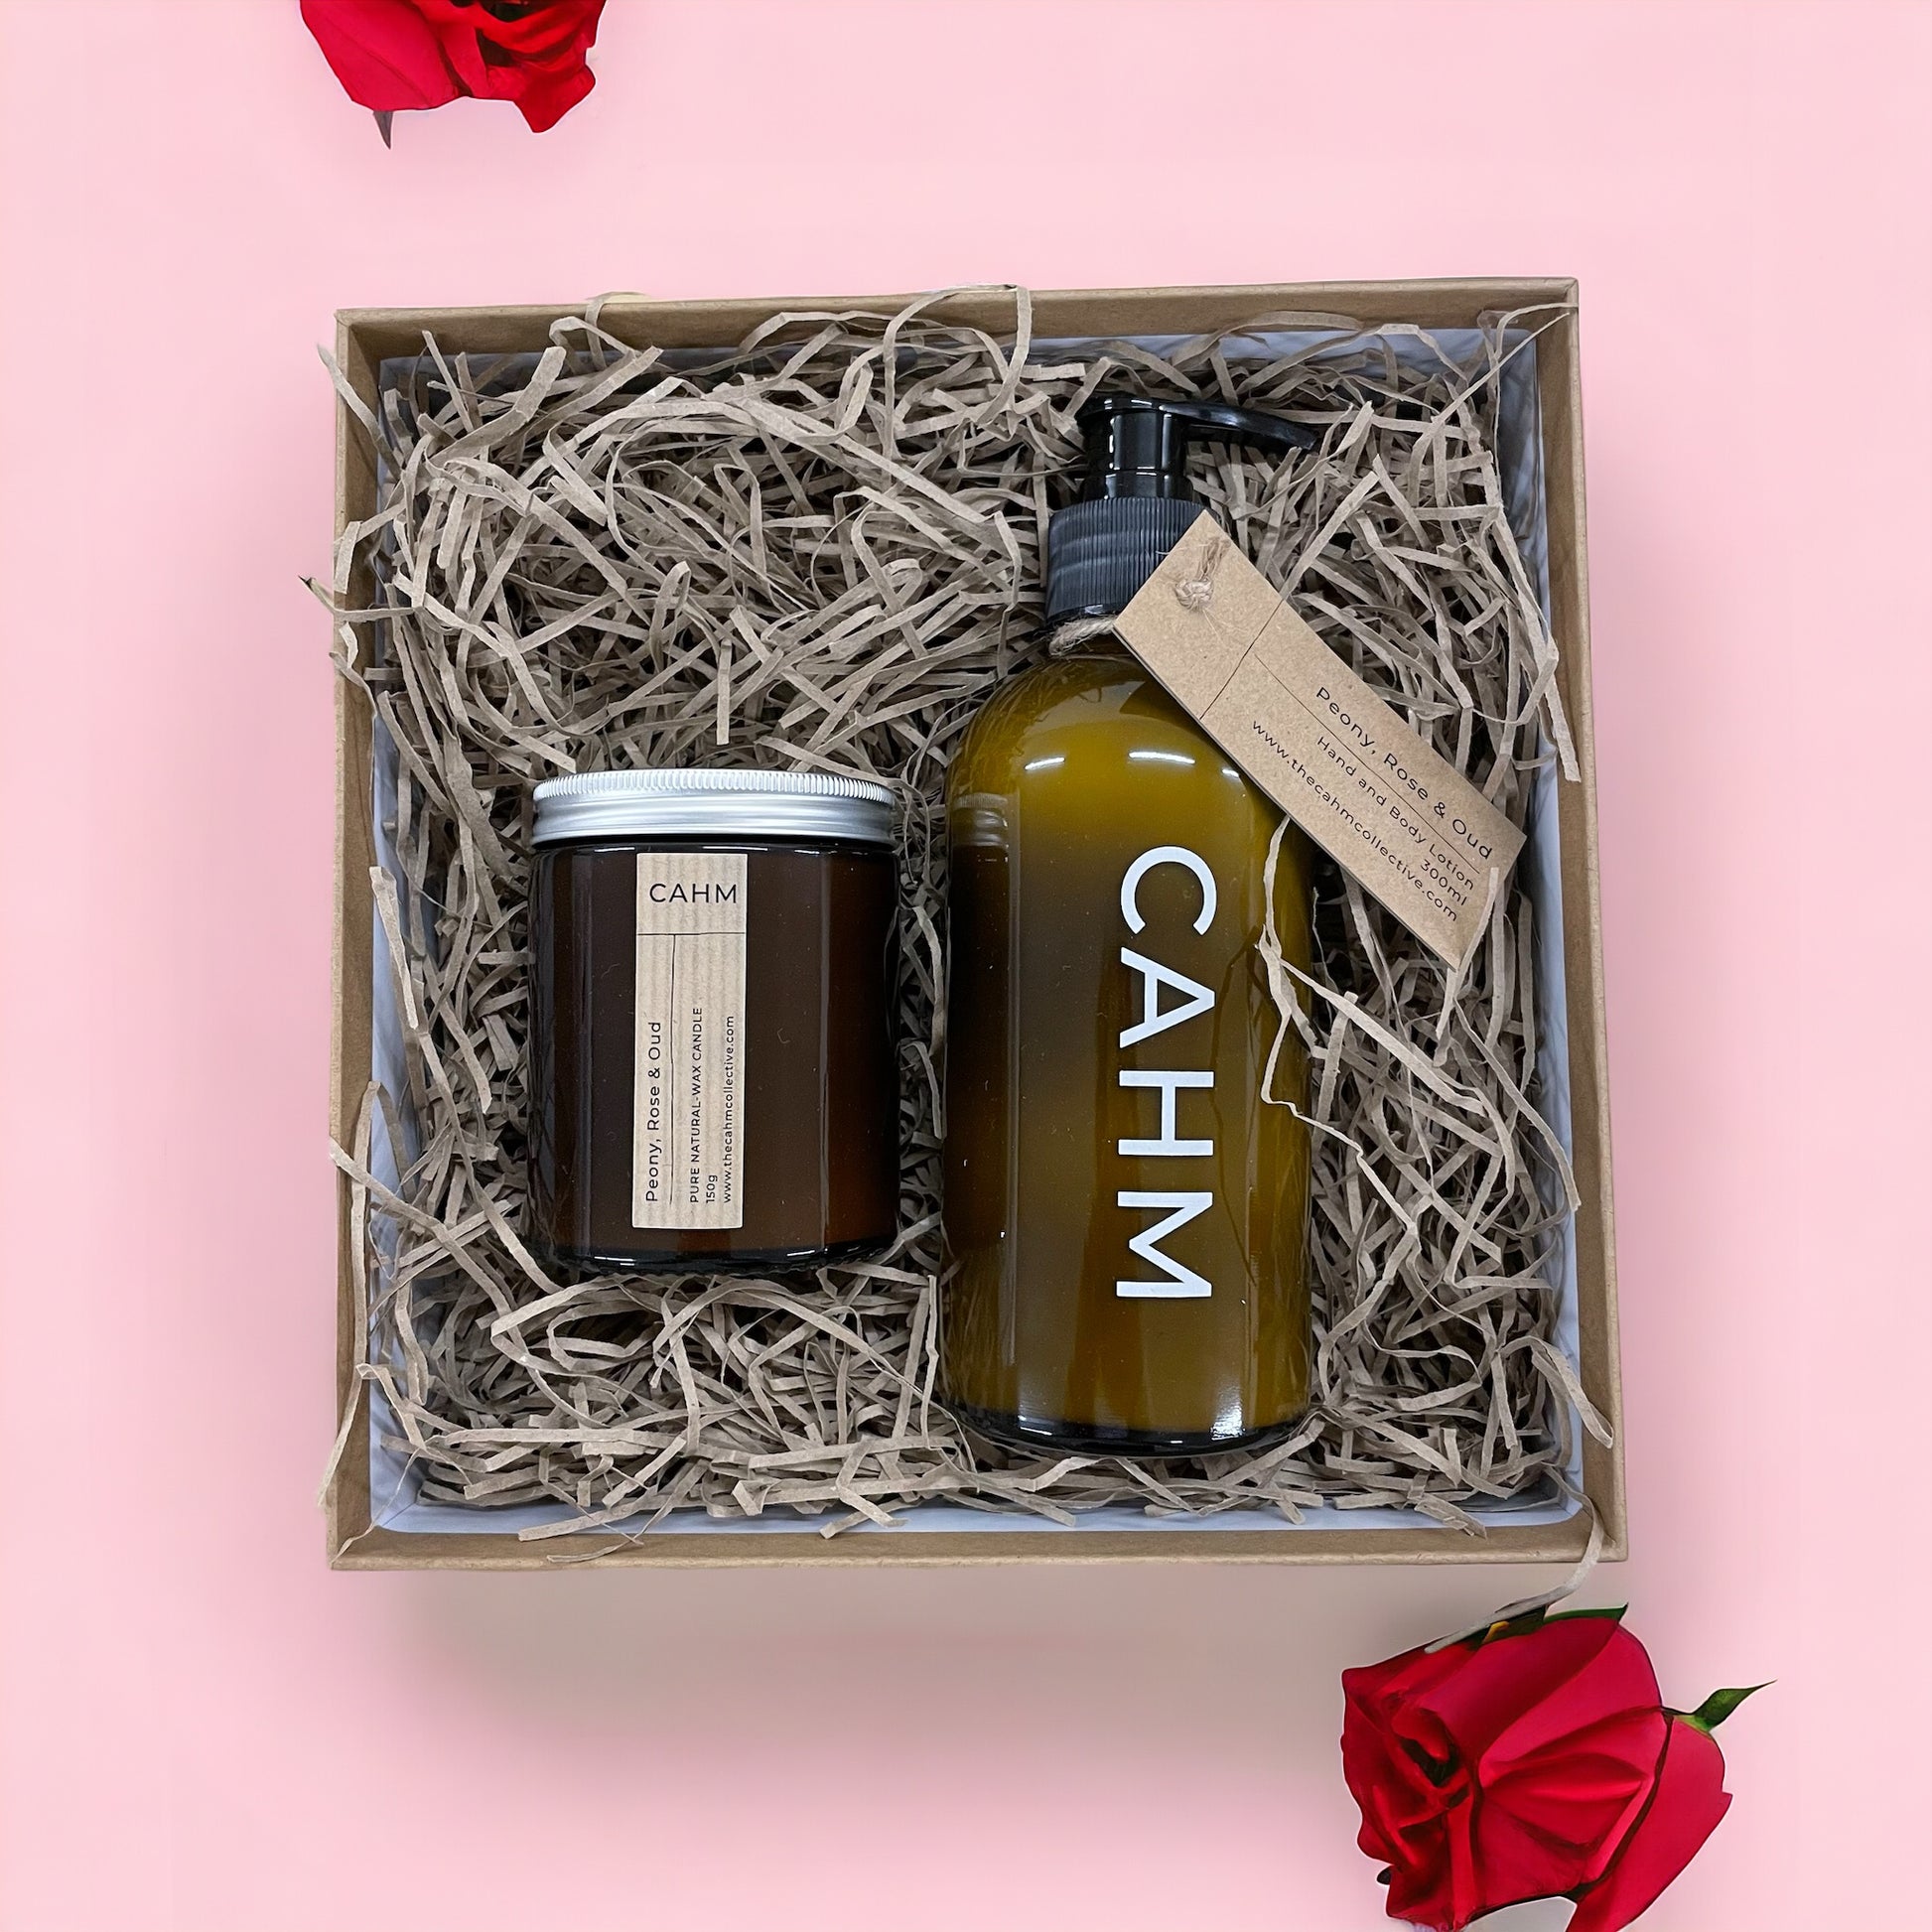 CAHM Candle and Hand & Body Lotion Gift Set